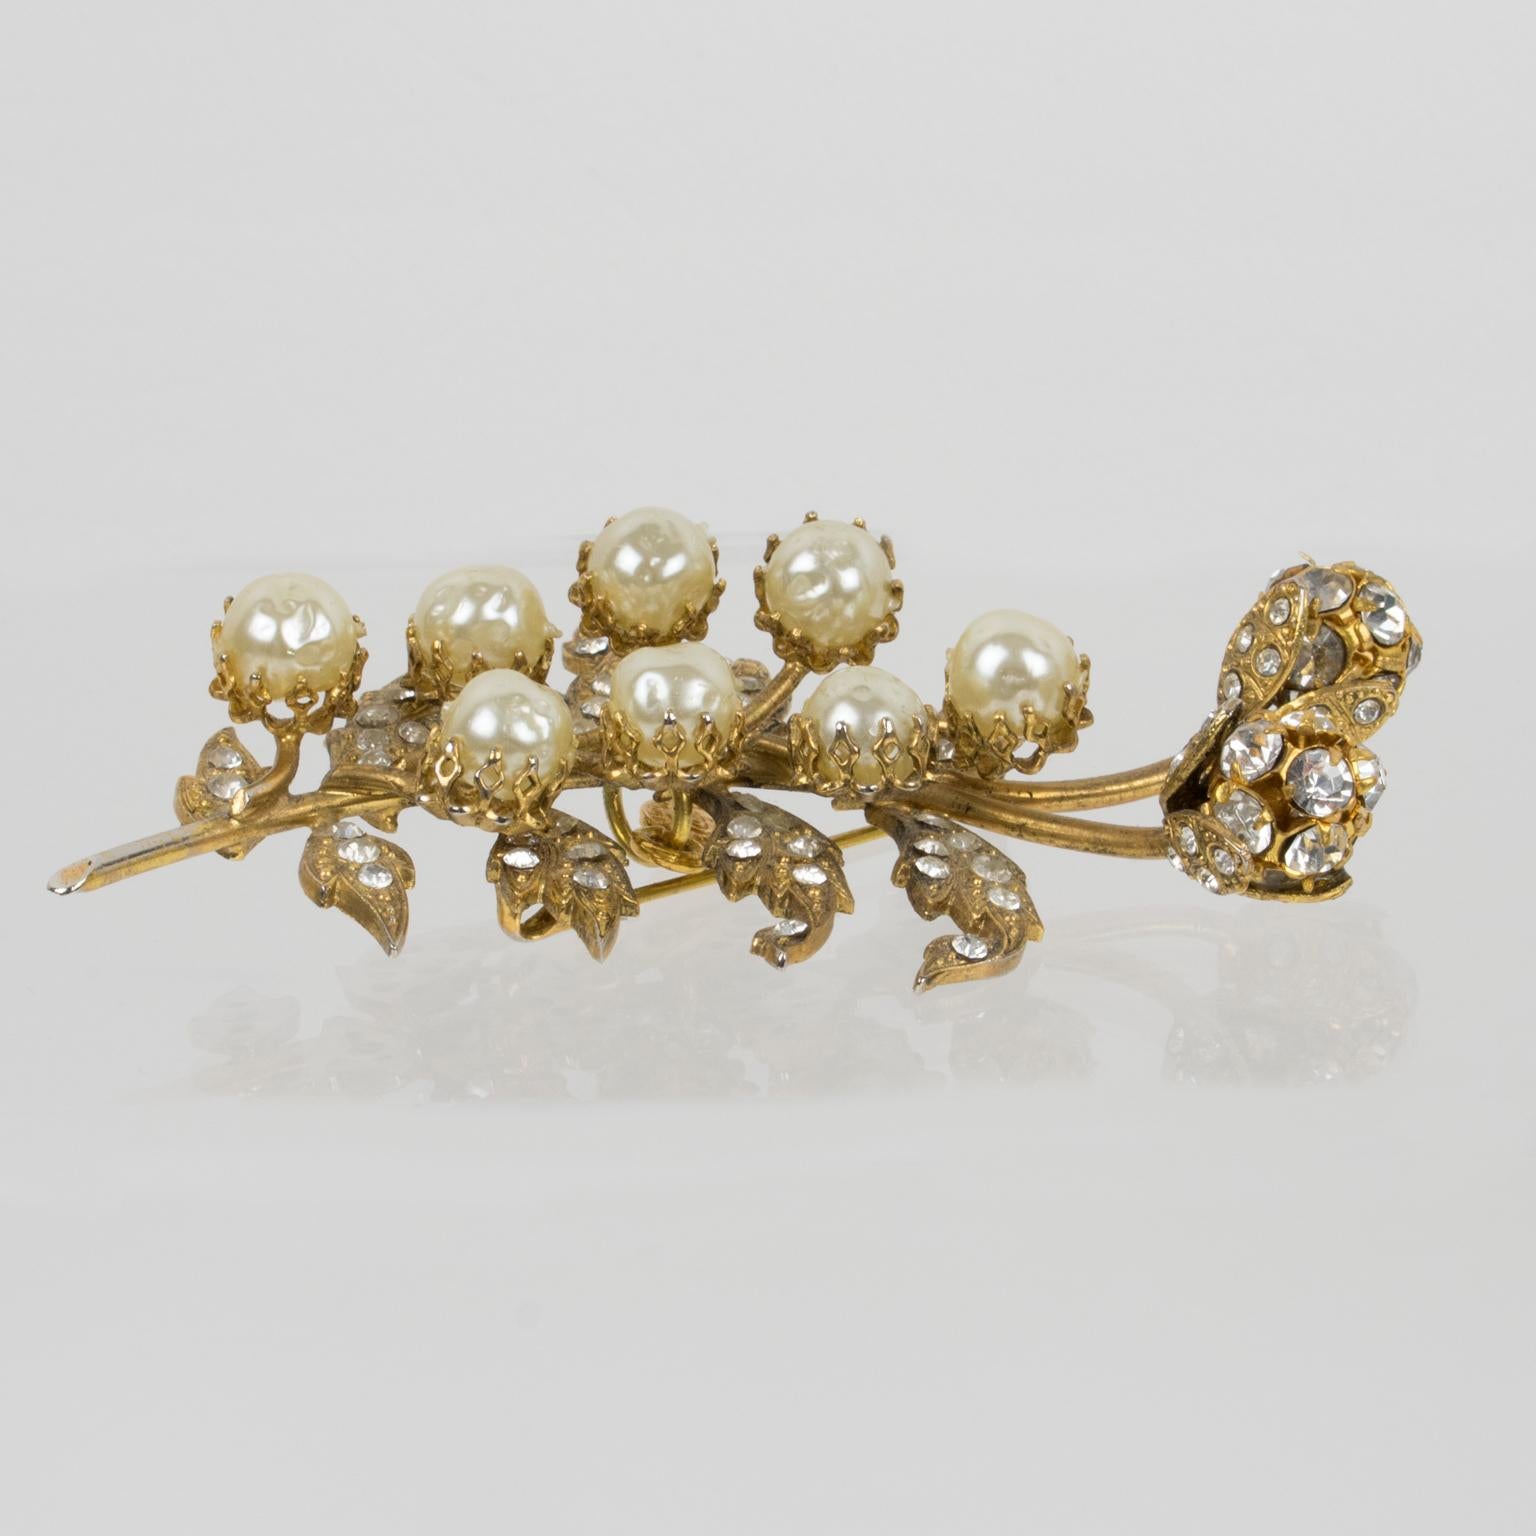 Christian Lacroix Jeweled Pin Brooch, Floral with Pearls In Good Condition For Sale In Atlanta, GA